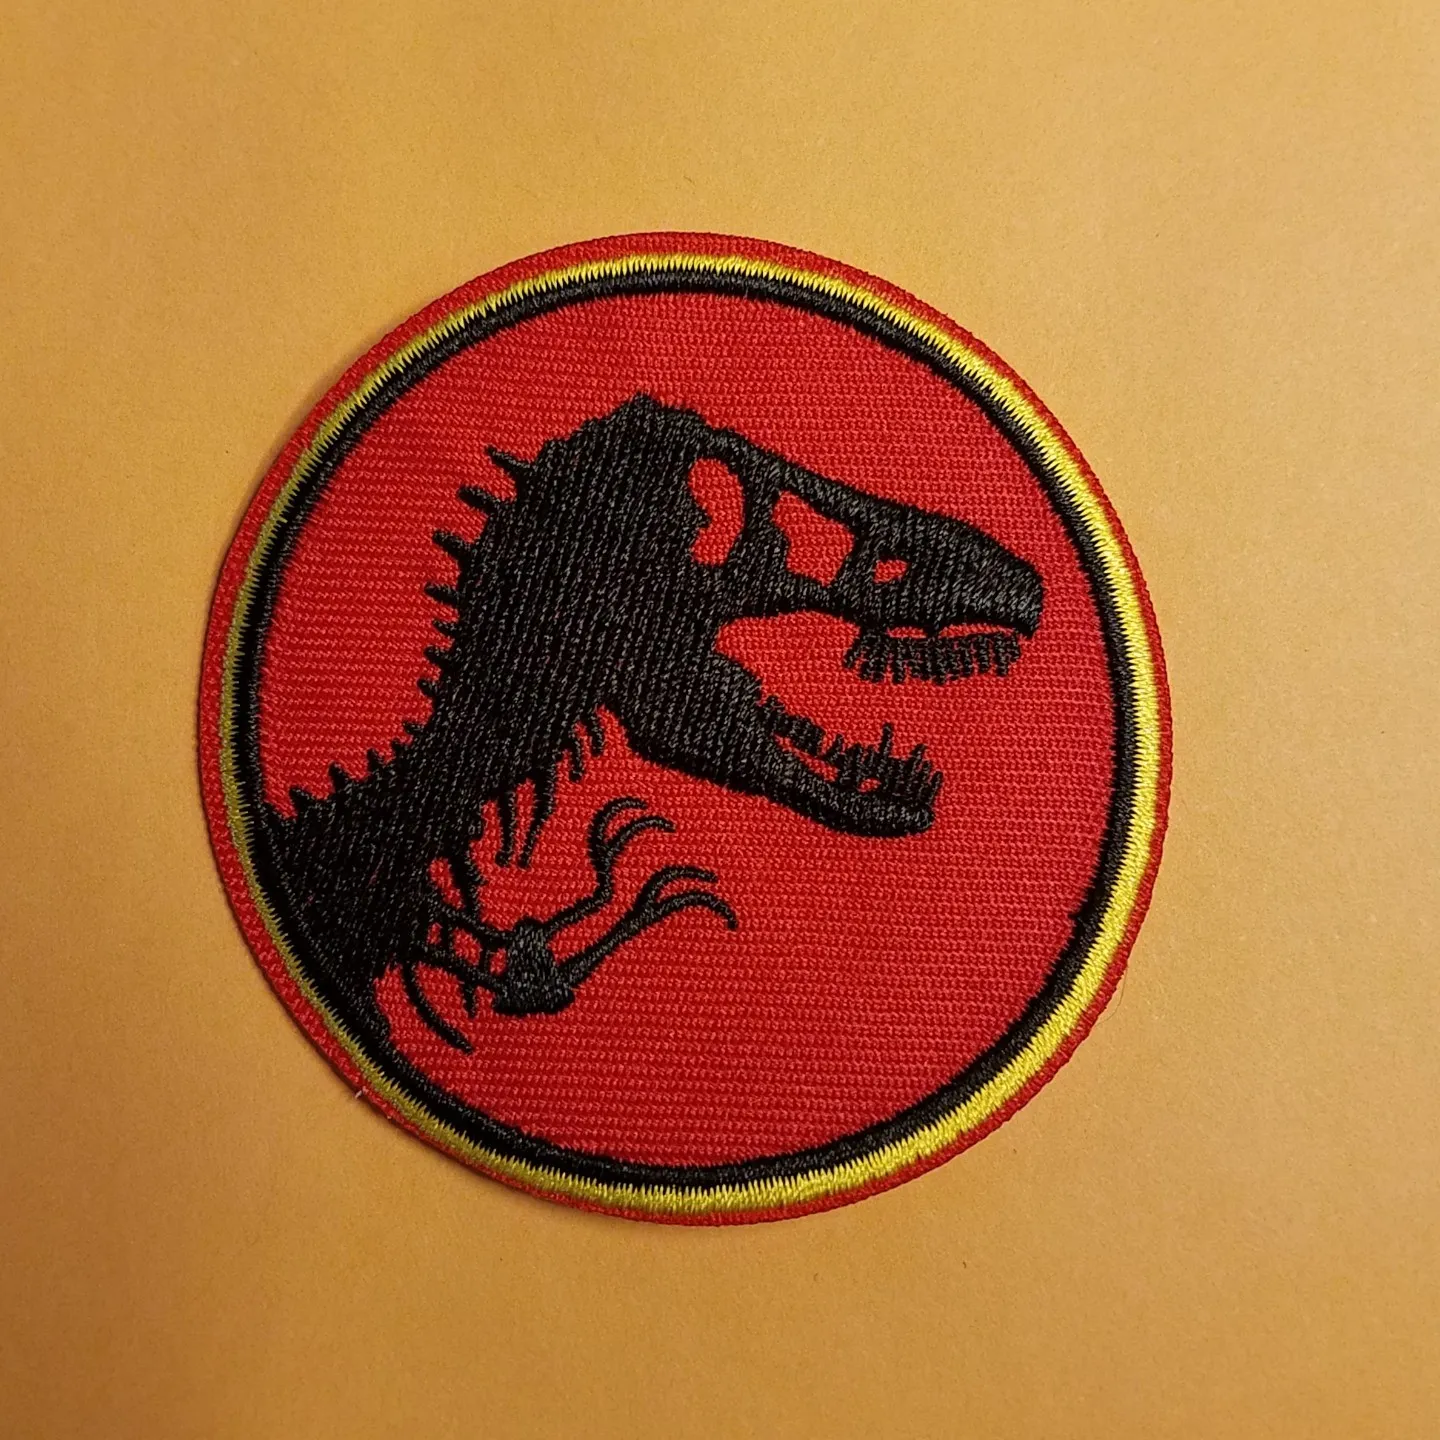 Jurassic World Park Uniform/costume Patch 2 3/4 Inches Wide